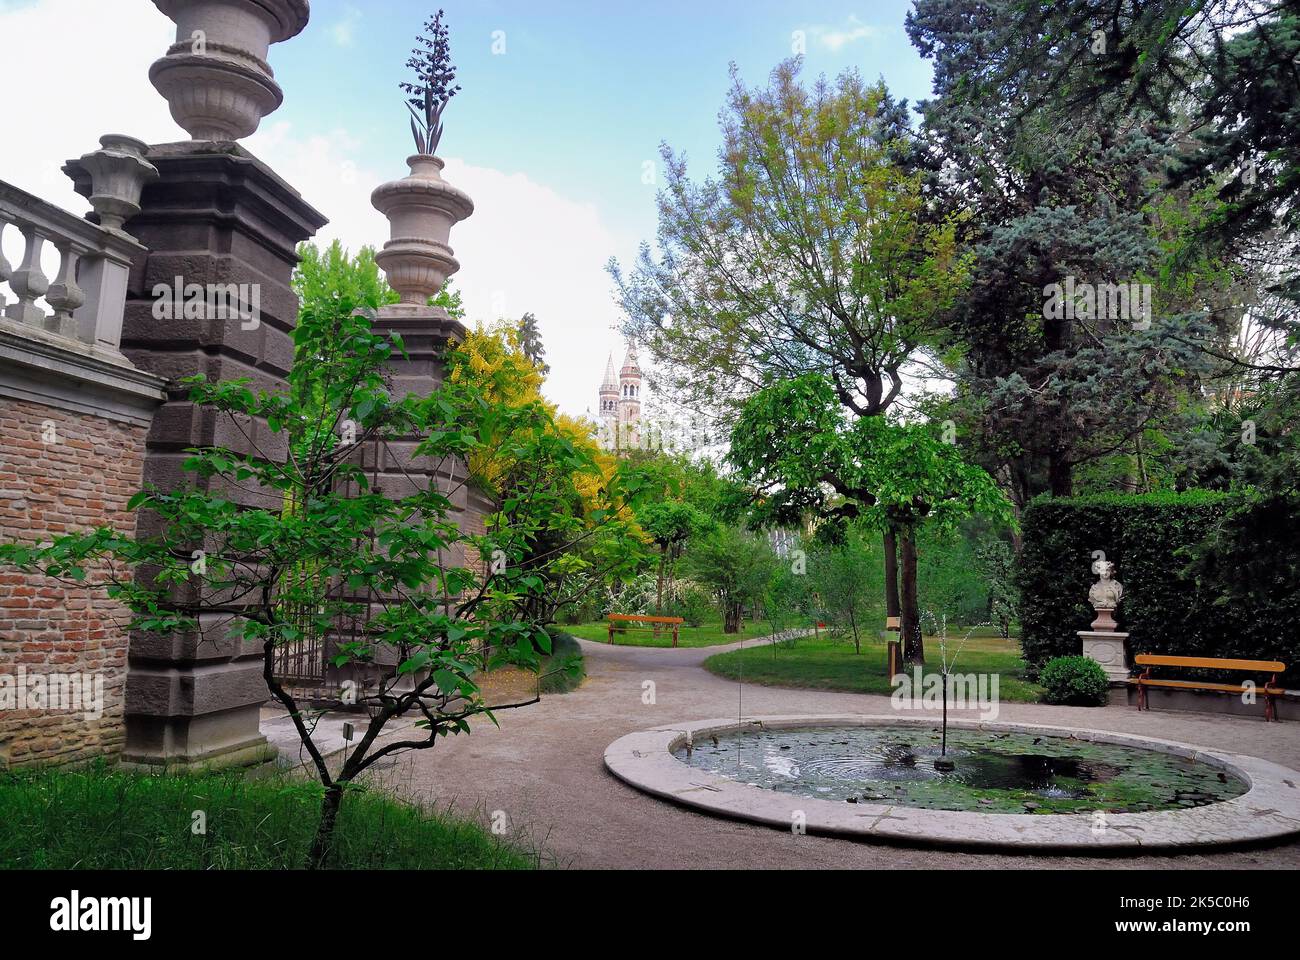 The University of Padua Botanical Garden. The Botanical Garden of the University of Padua was established in 1545 for the cultivation of medicinal plants. The old entrance and the fountain. Stock Photo